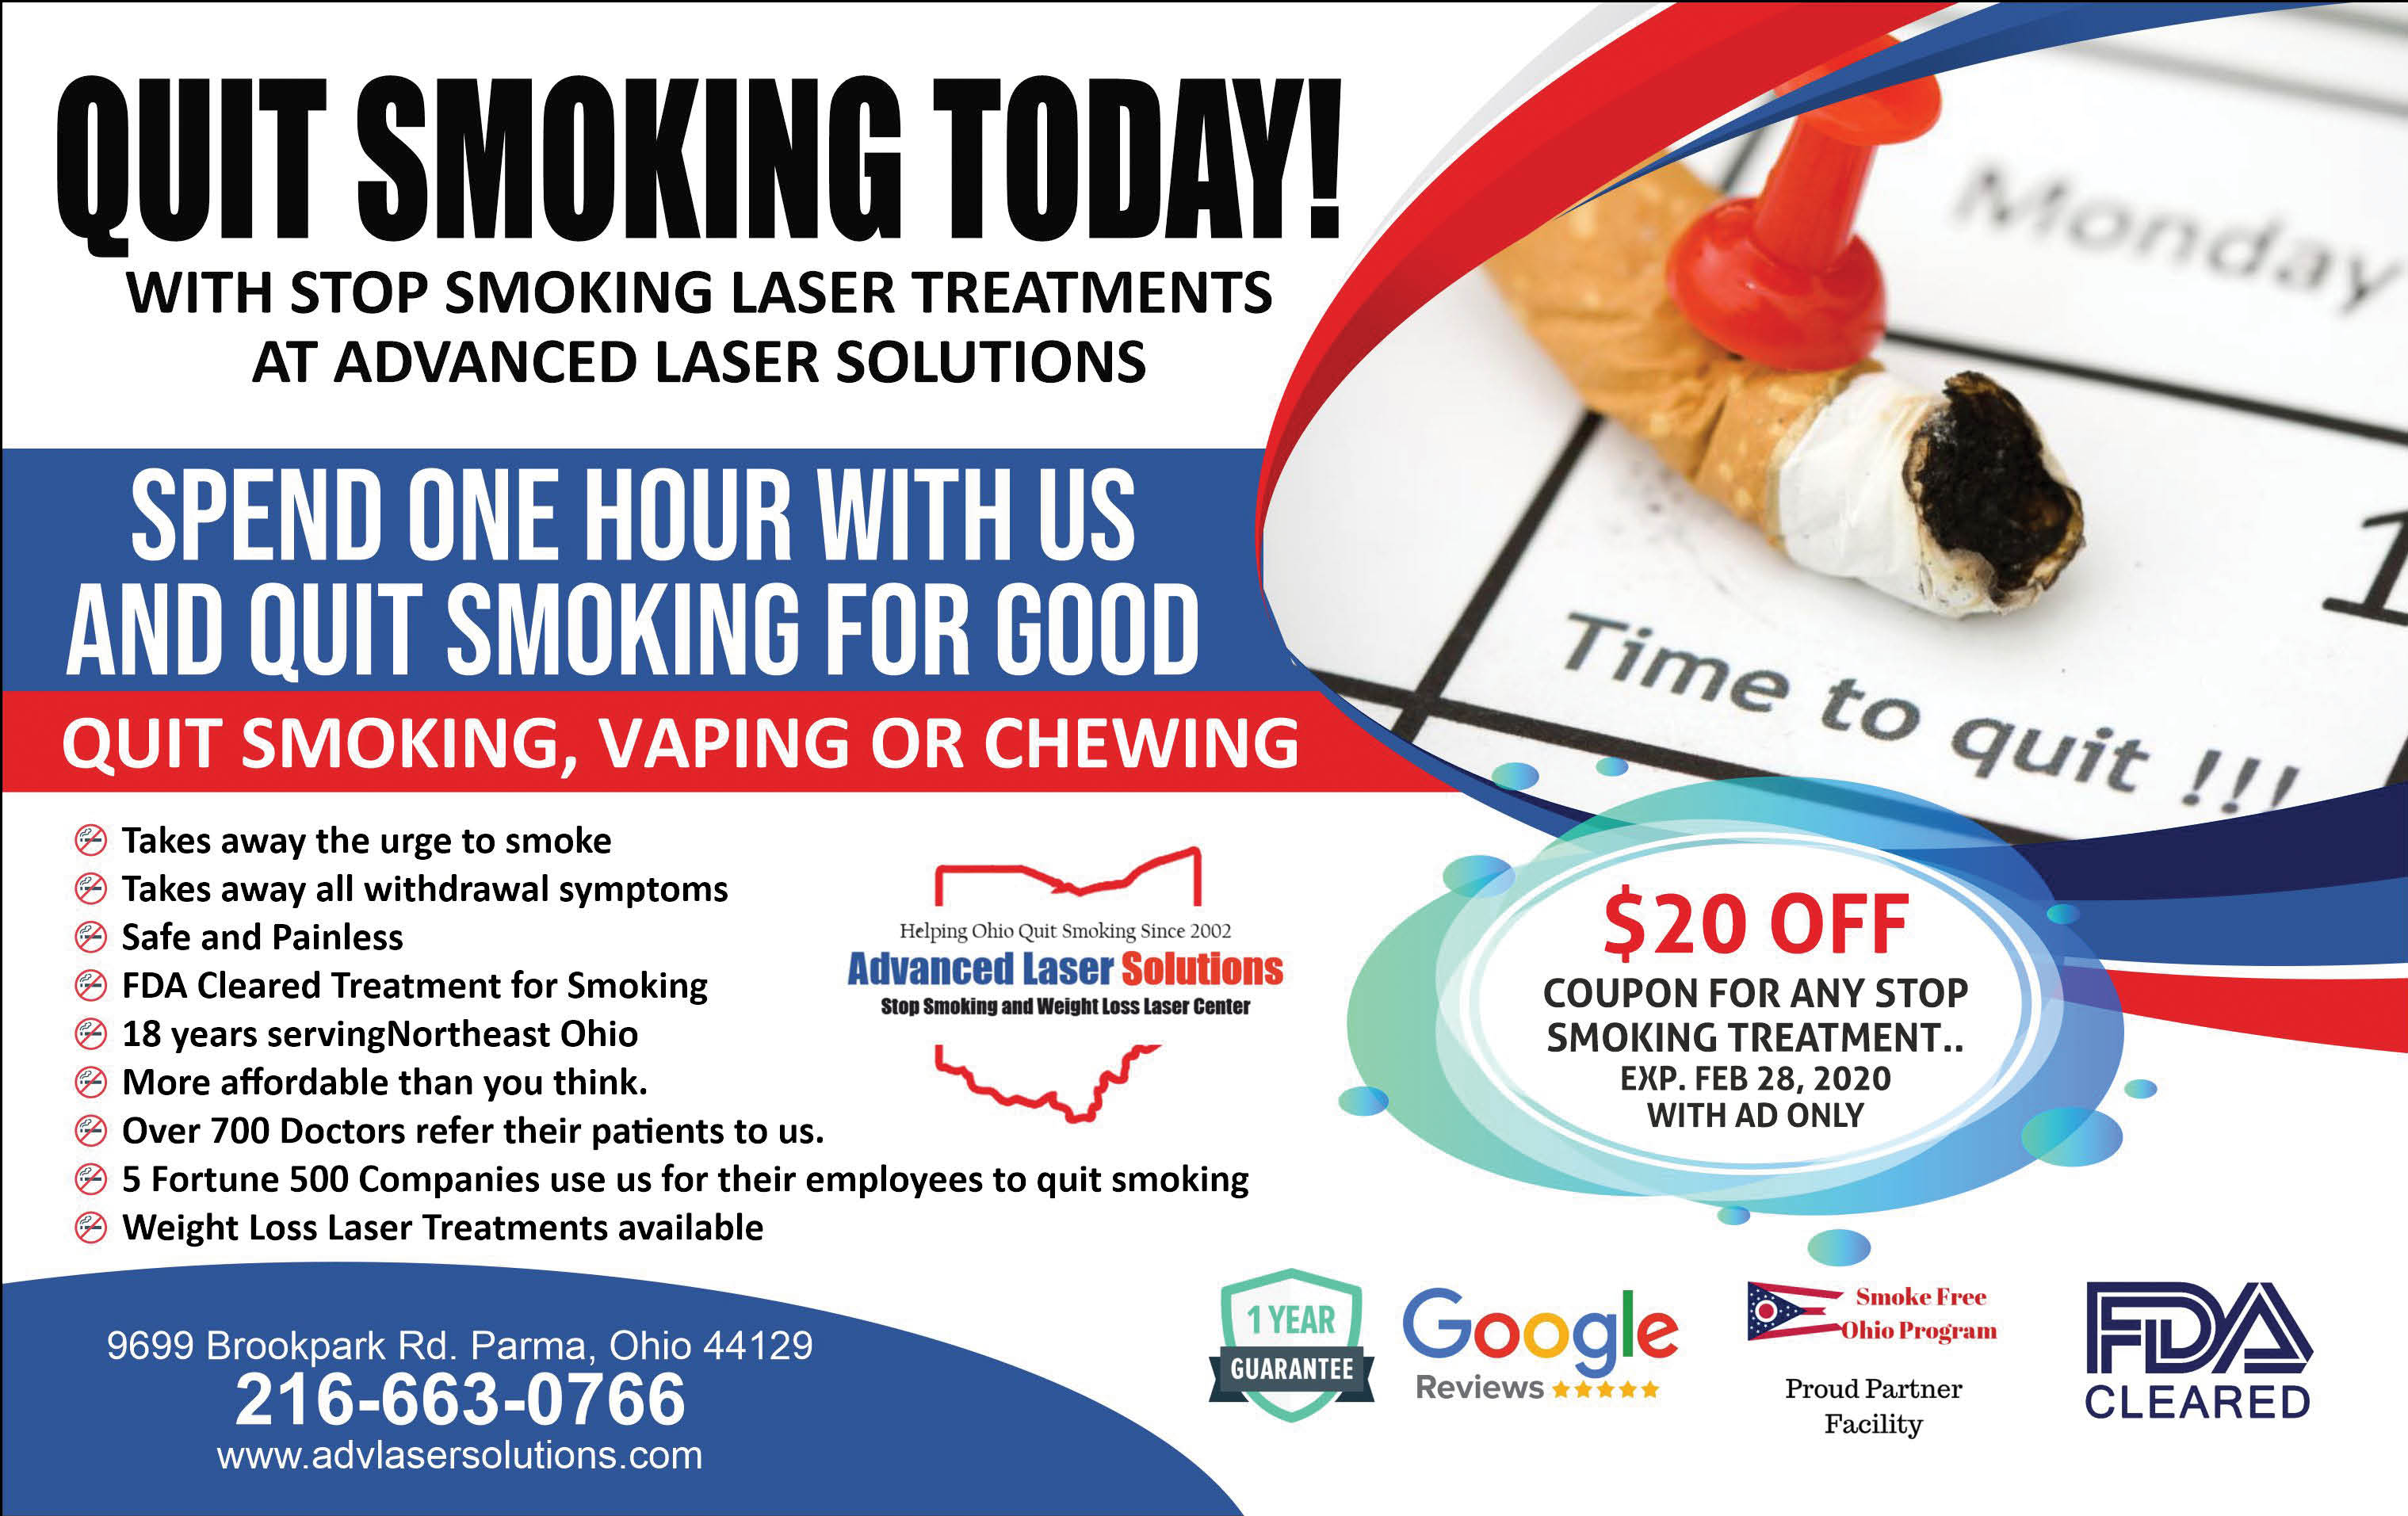 Advanced Laser Solutions: Quit Smoking Today! - The Villager Newspaper